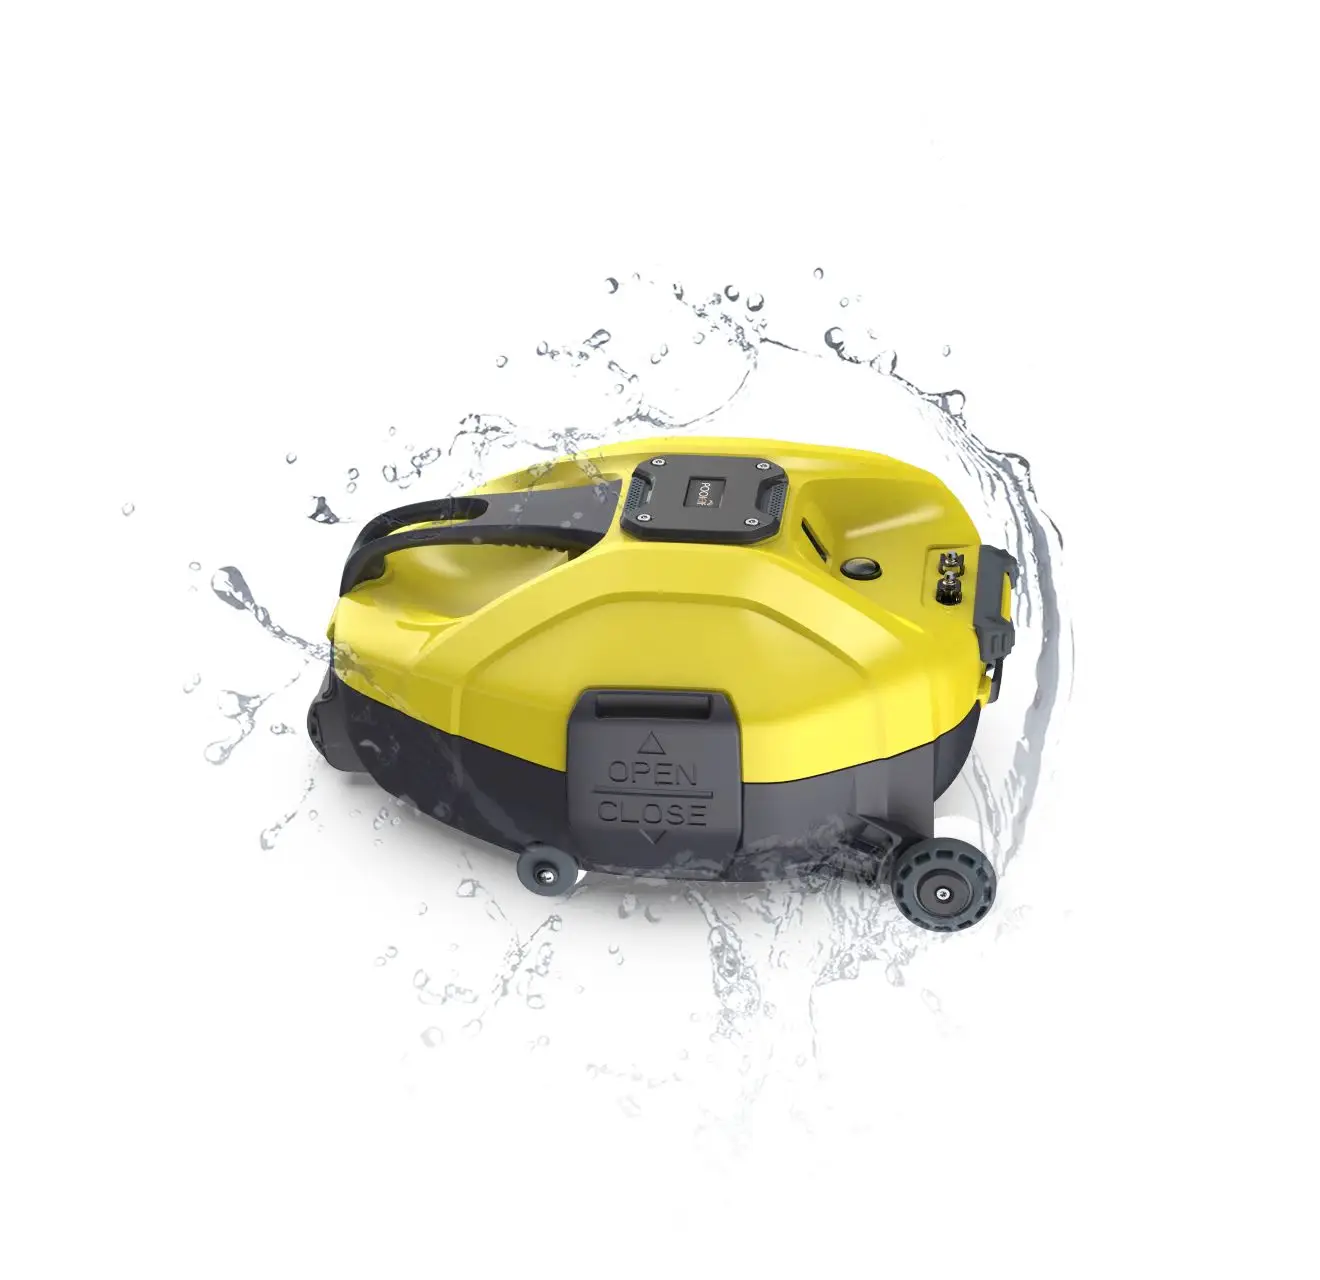 swimming pool automatic cleaning robot poolelf JET10 cordless robotic cleaner rechargeable swimming pool cleaner